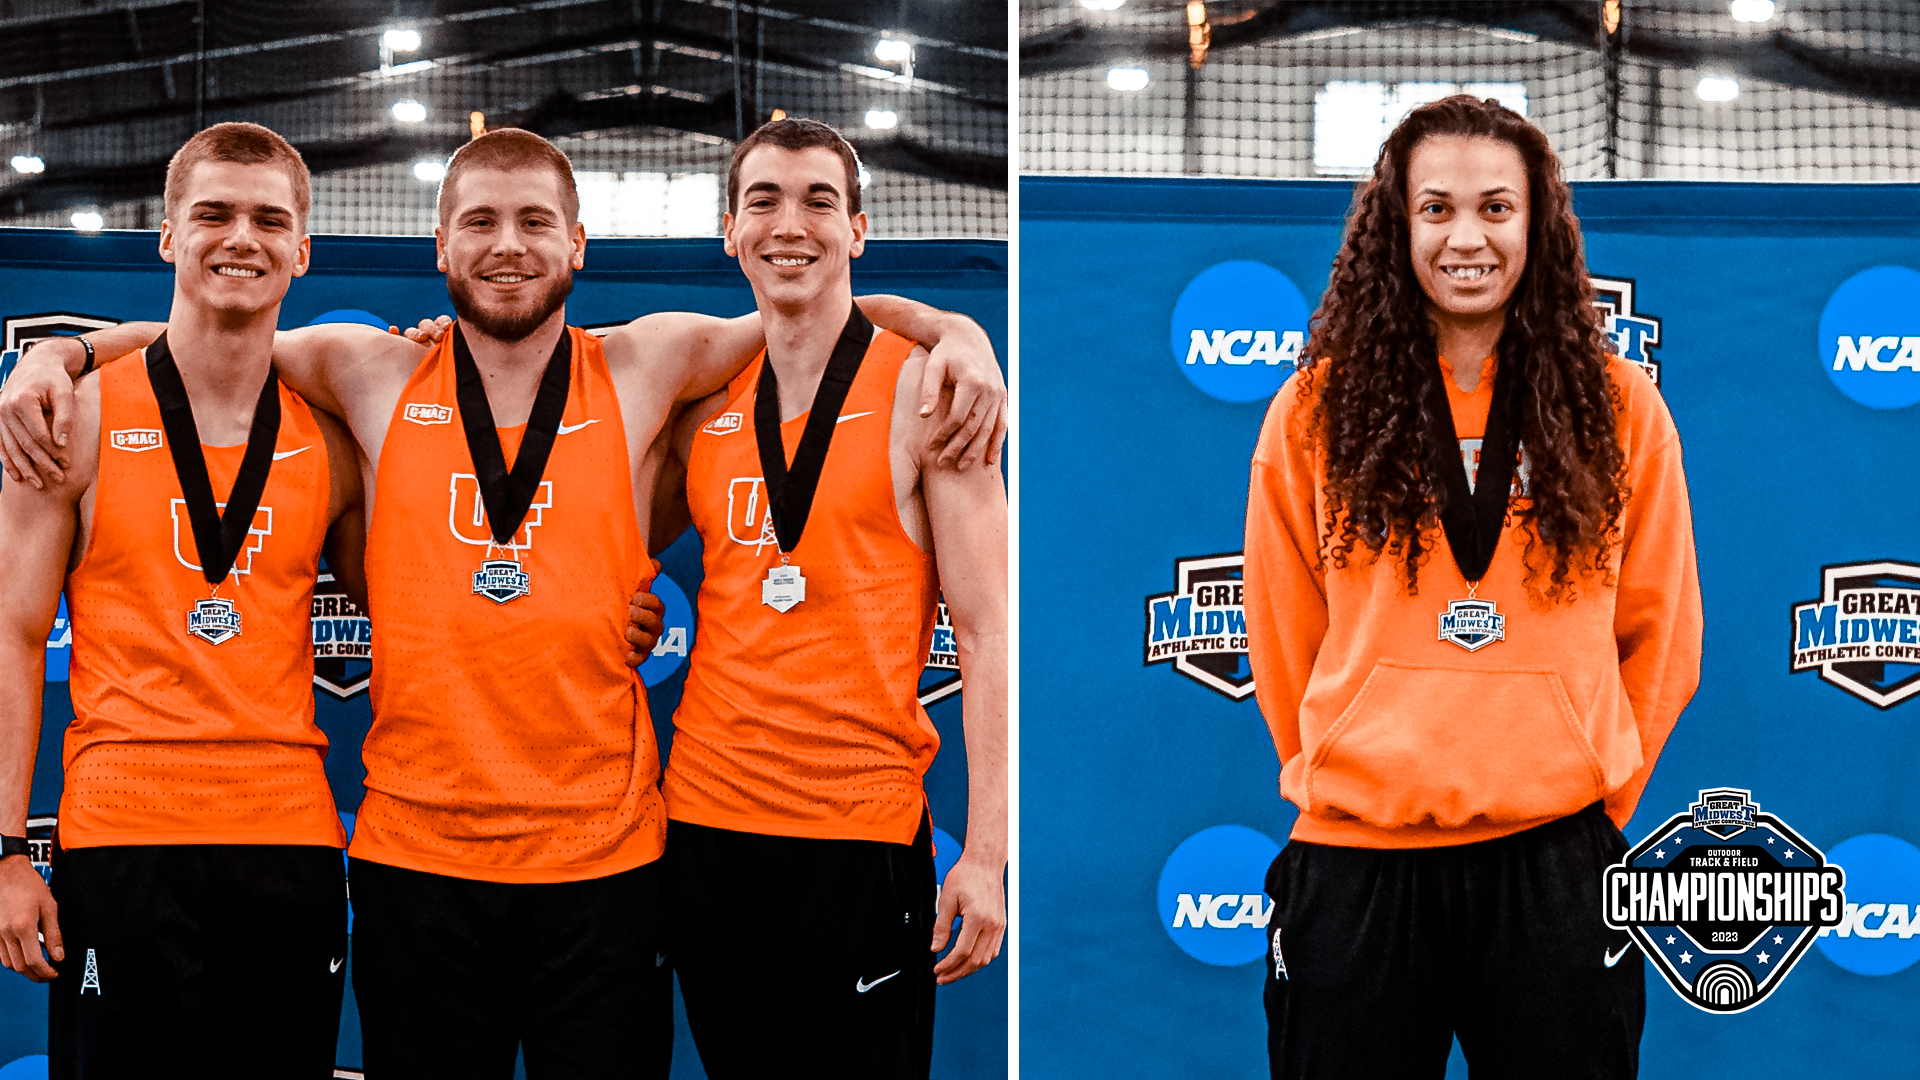 Findlay Off to Fast Start at G-MAC Indoor Championship